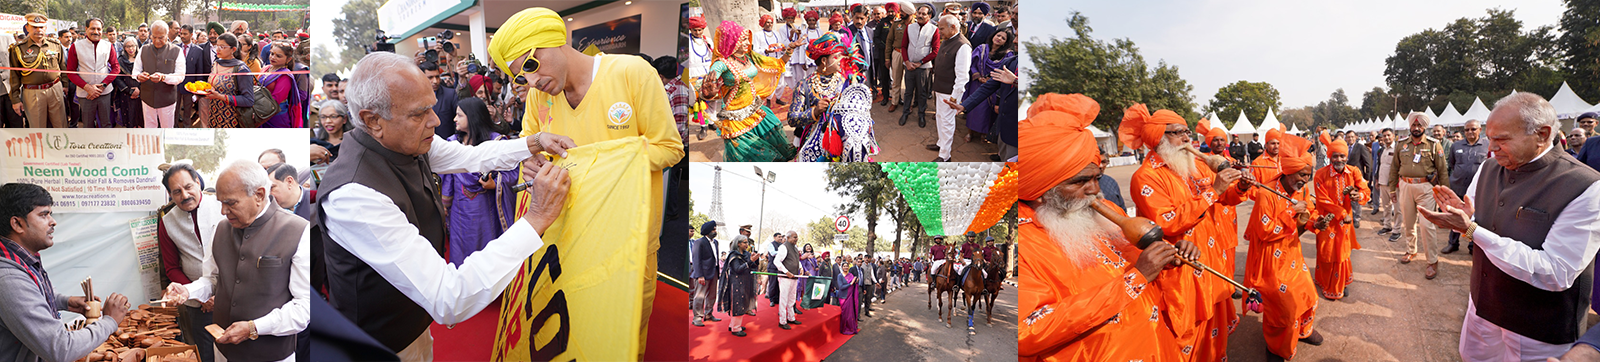 Colourful Chandigarh Carnival Celebrates Spirit and Legacy of the City